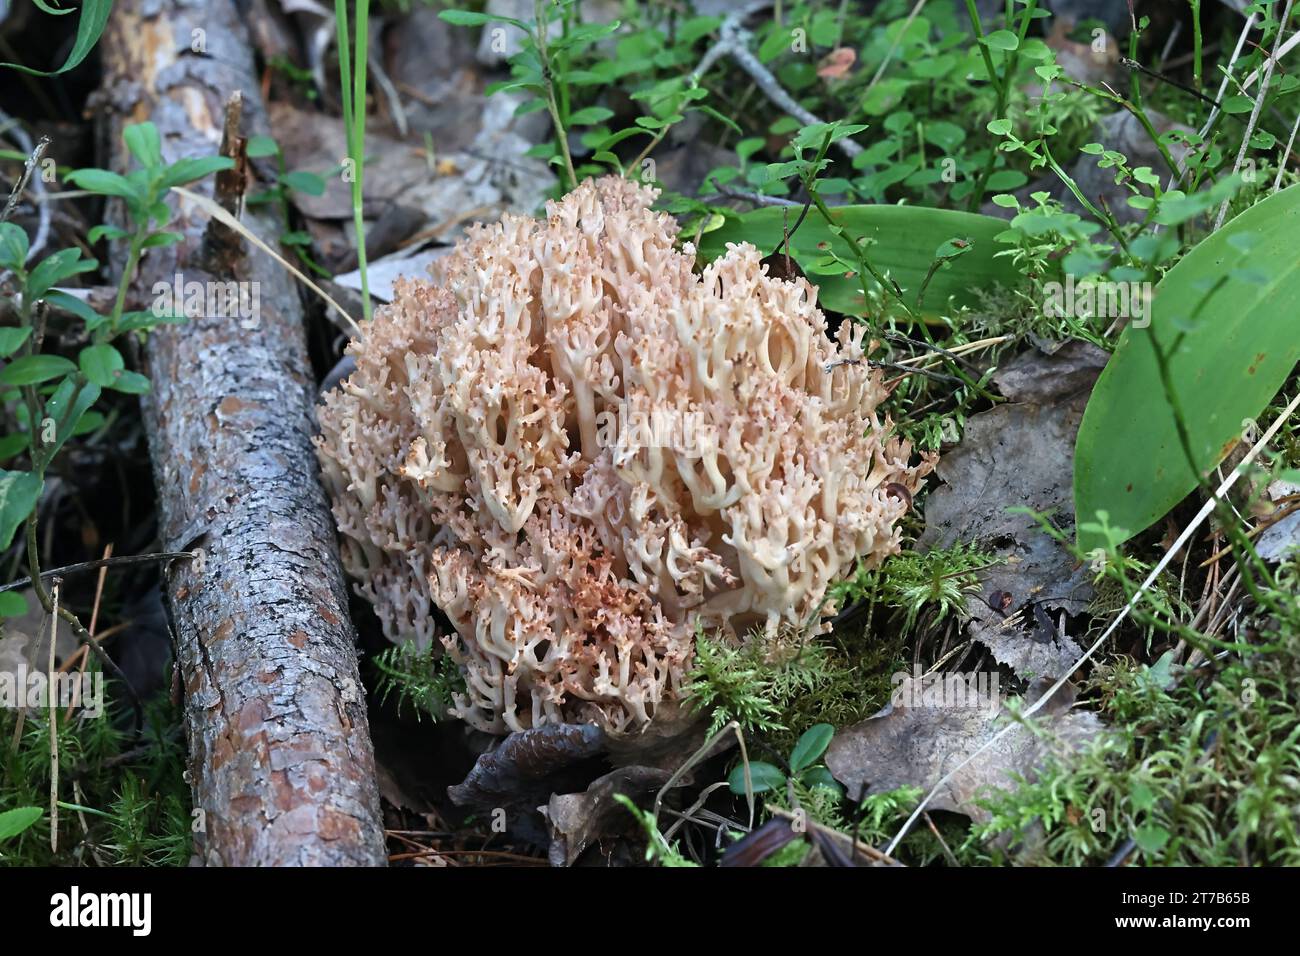 Ramaria botrytis, commonly known as the clustered coral, the pink-tipped coral mushroom, or the cauliflower coral, wild mushroom from Finland Stock Photo